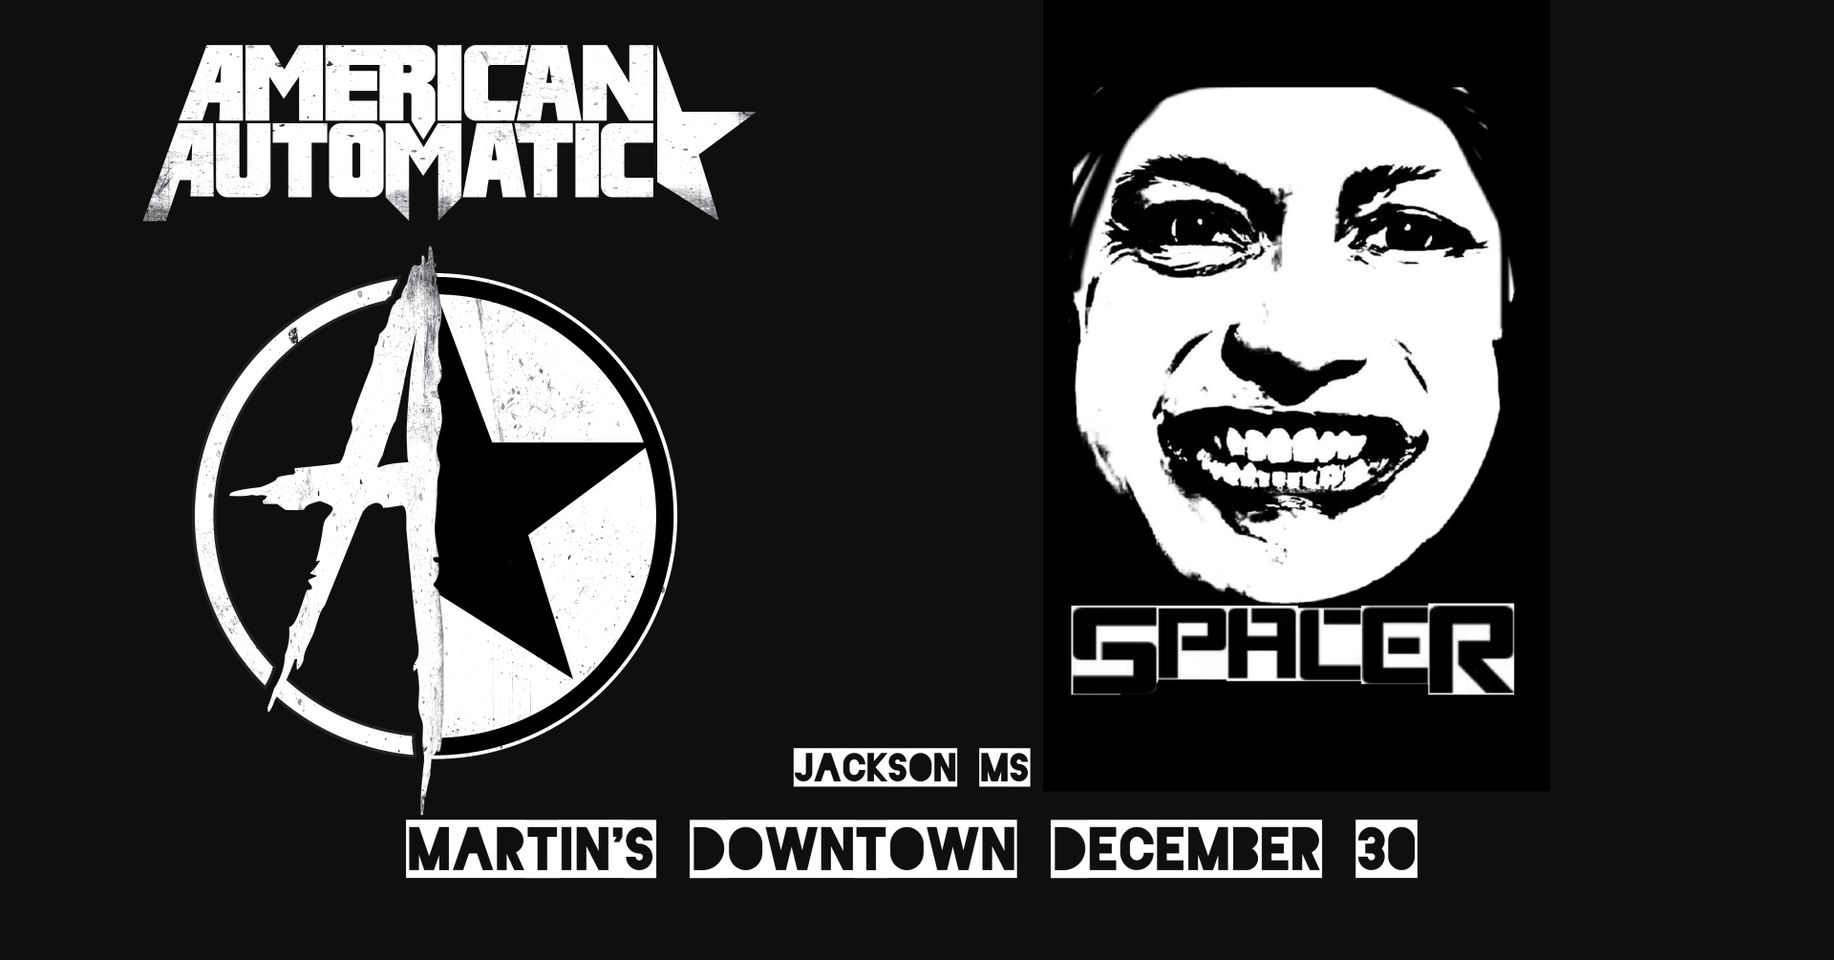 American Automatic & Spacer Live at Martin’s Downtown